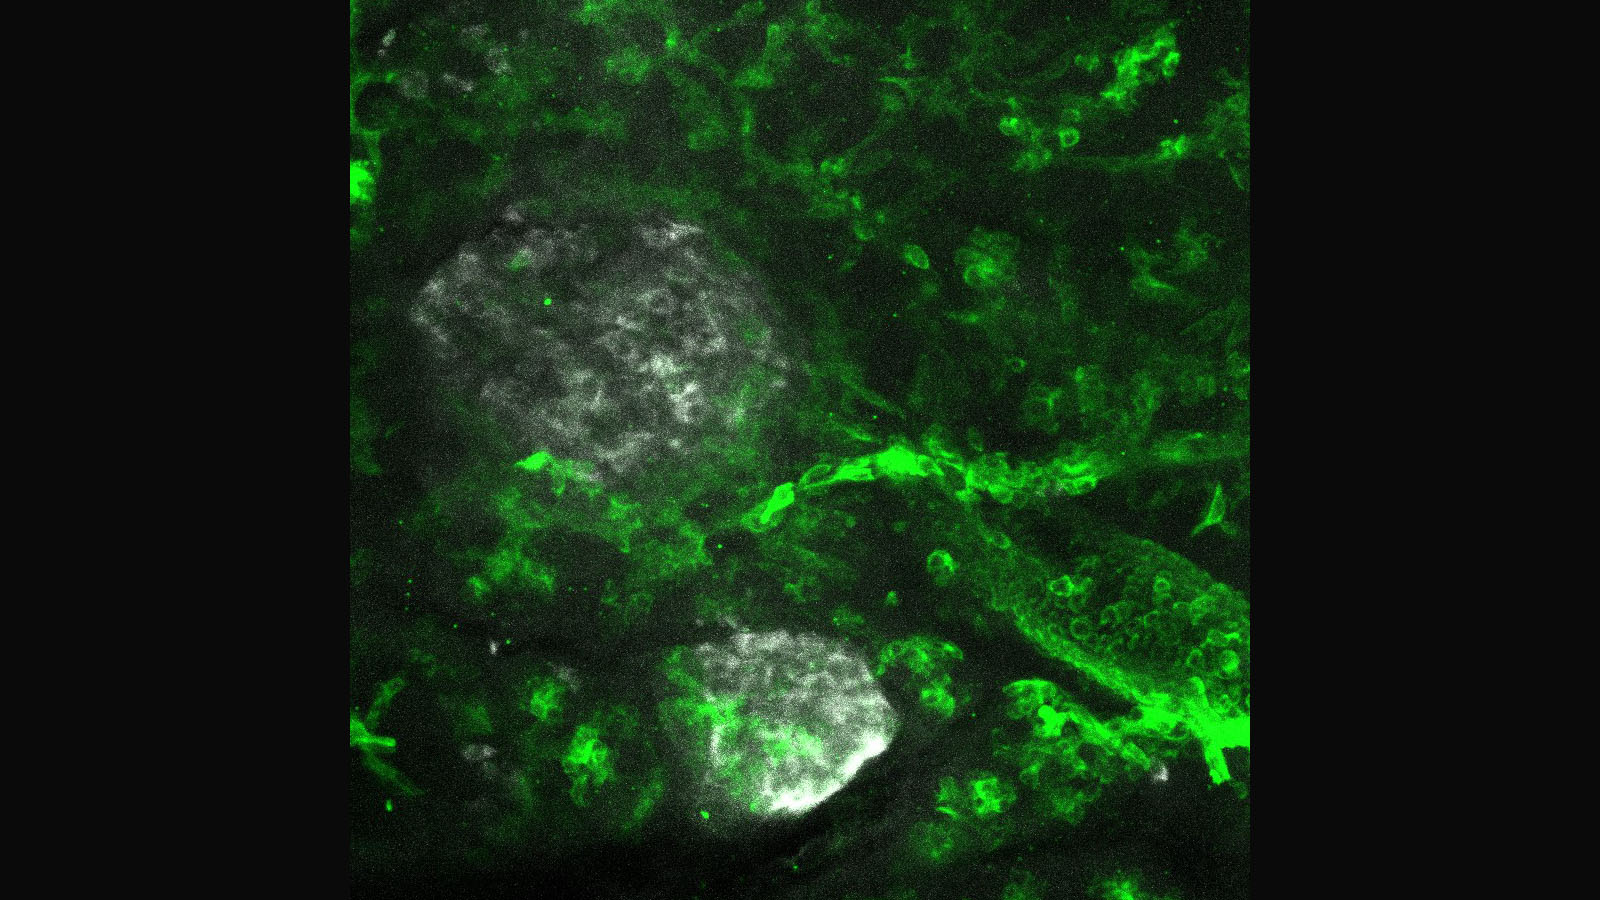 Confocal image of healthy human pancreas from Martha Campbell-Thompson at University of Florida